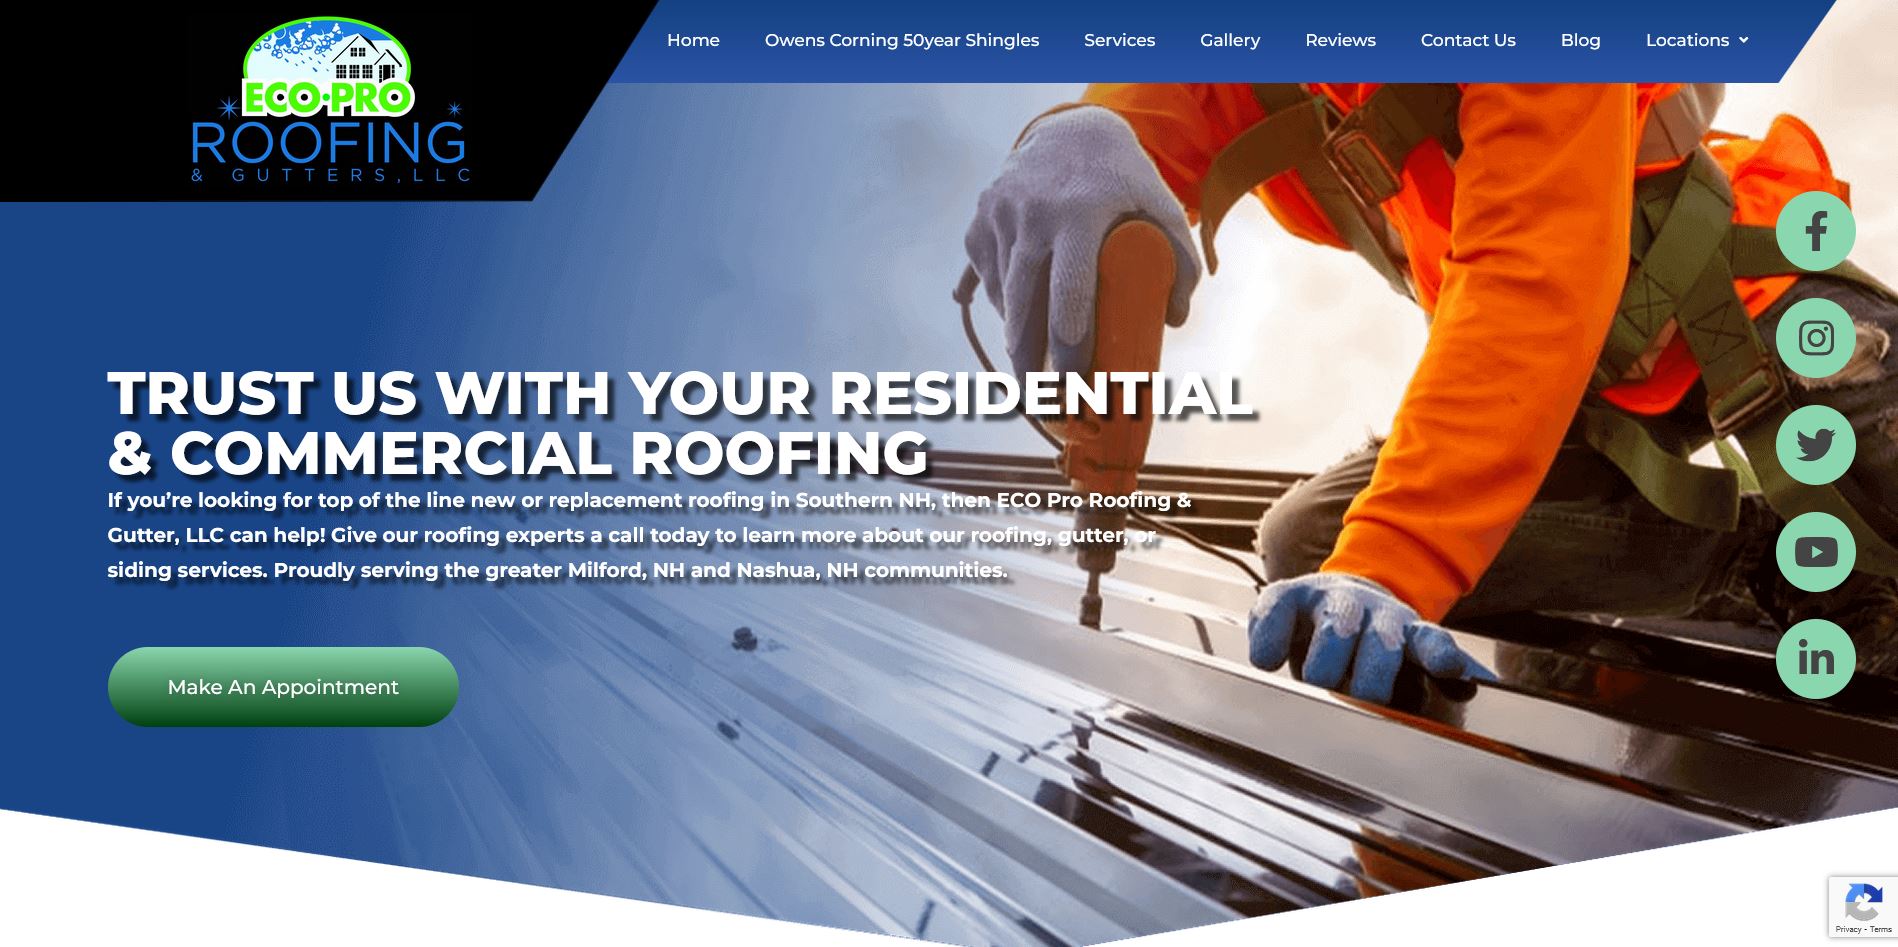 Exceptional Commercial & Residential Roofing Services Bedford NH